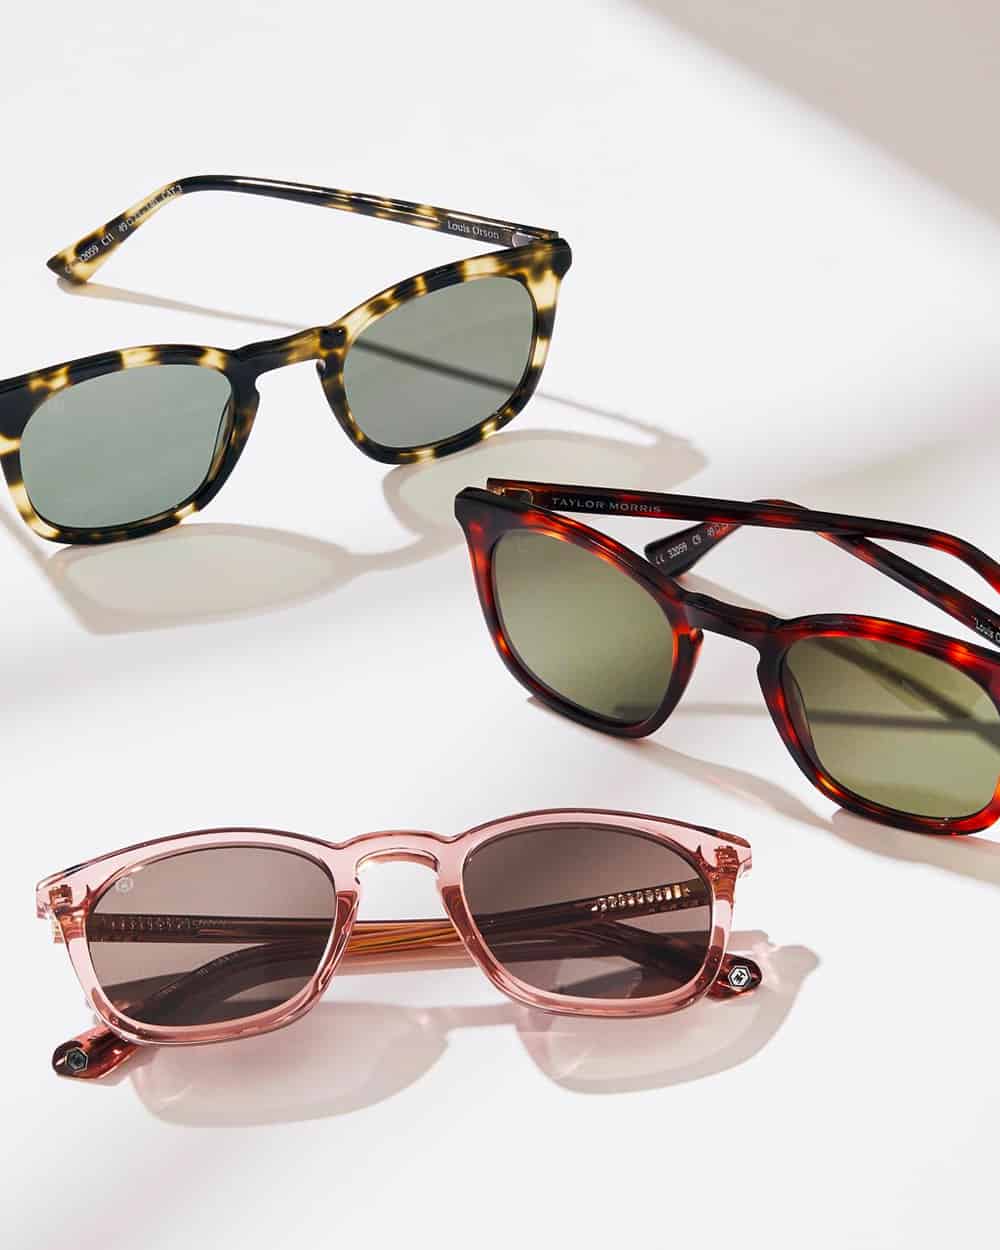 Three pairs of Morris sunglasses in tiger acetate, tortoiseshell and clear pink frames